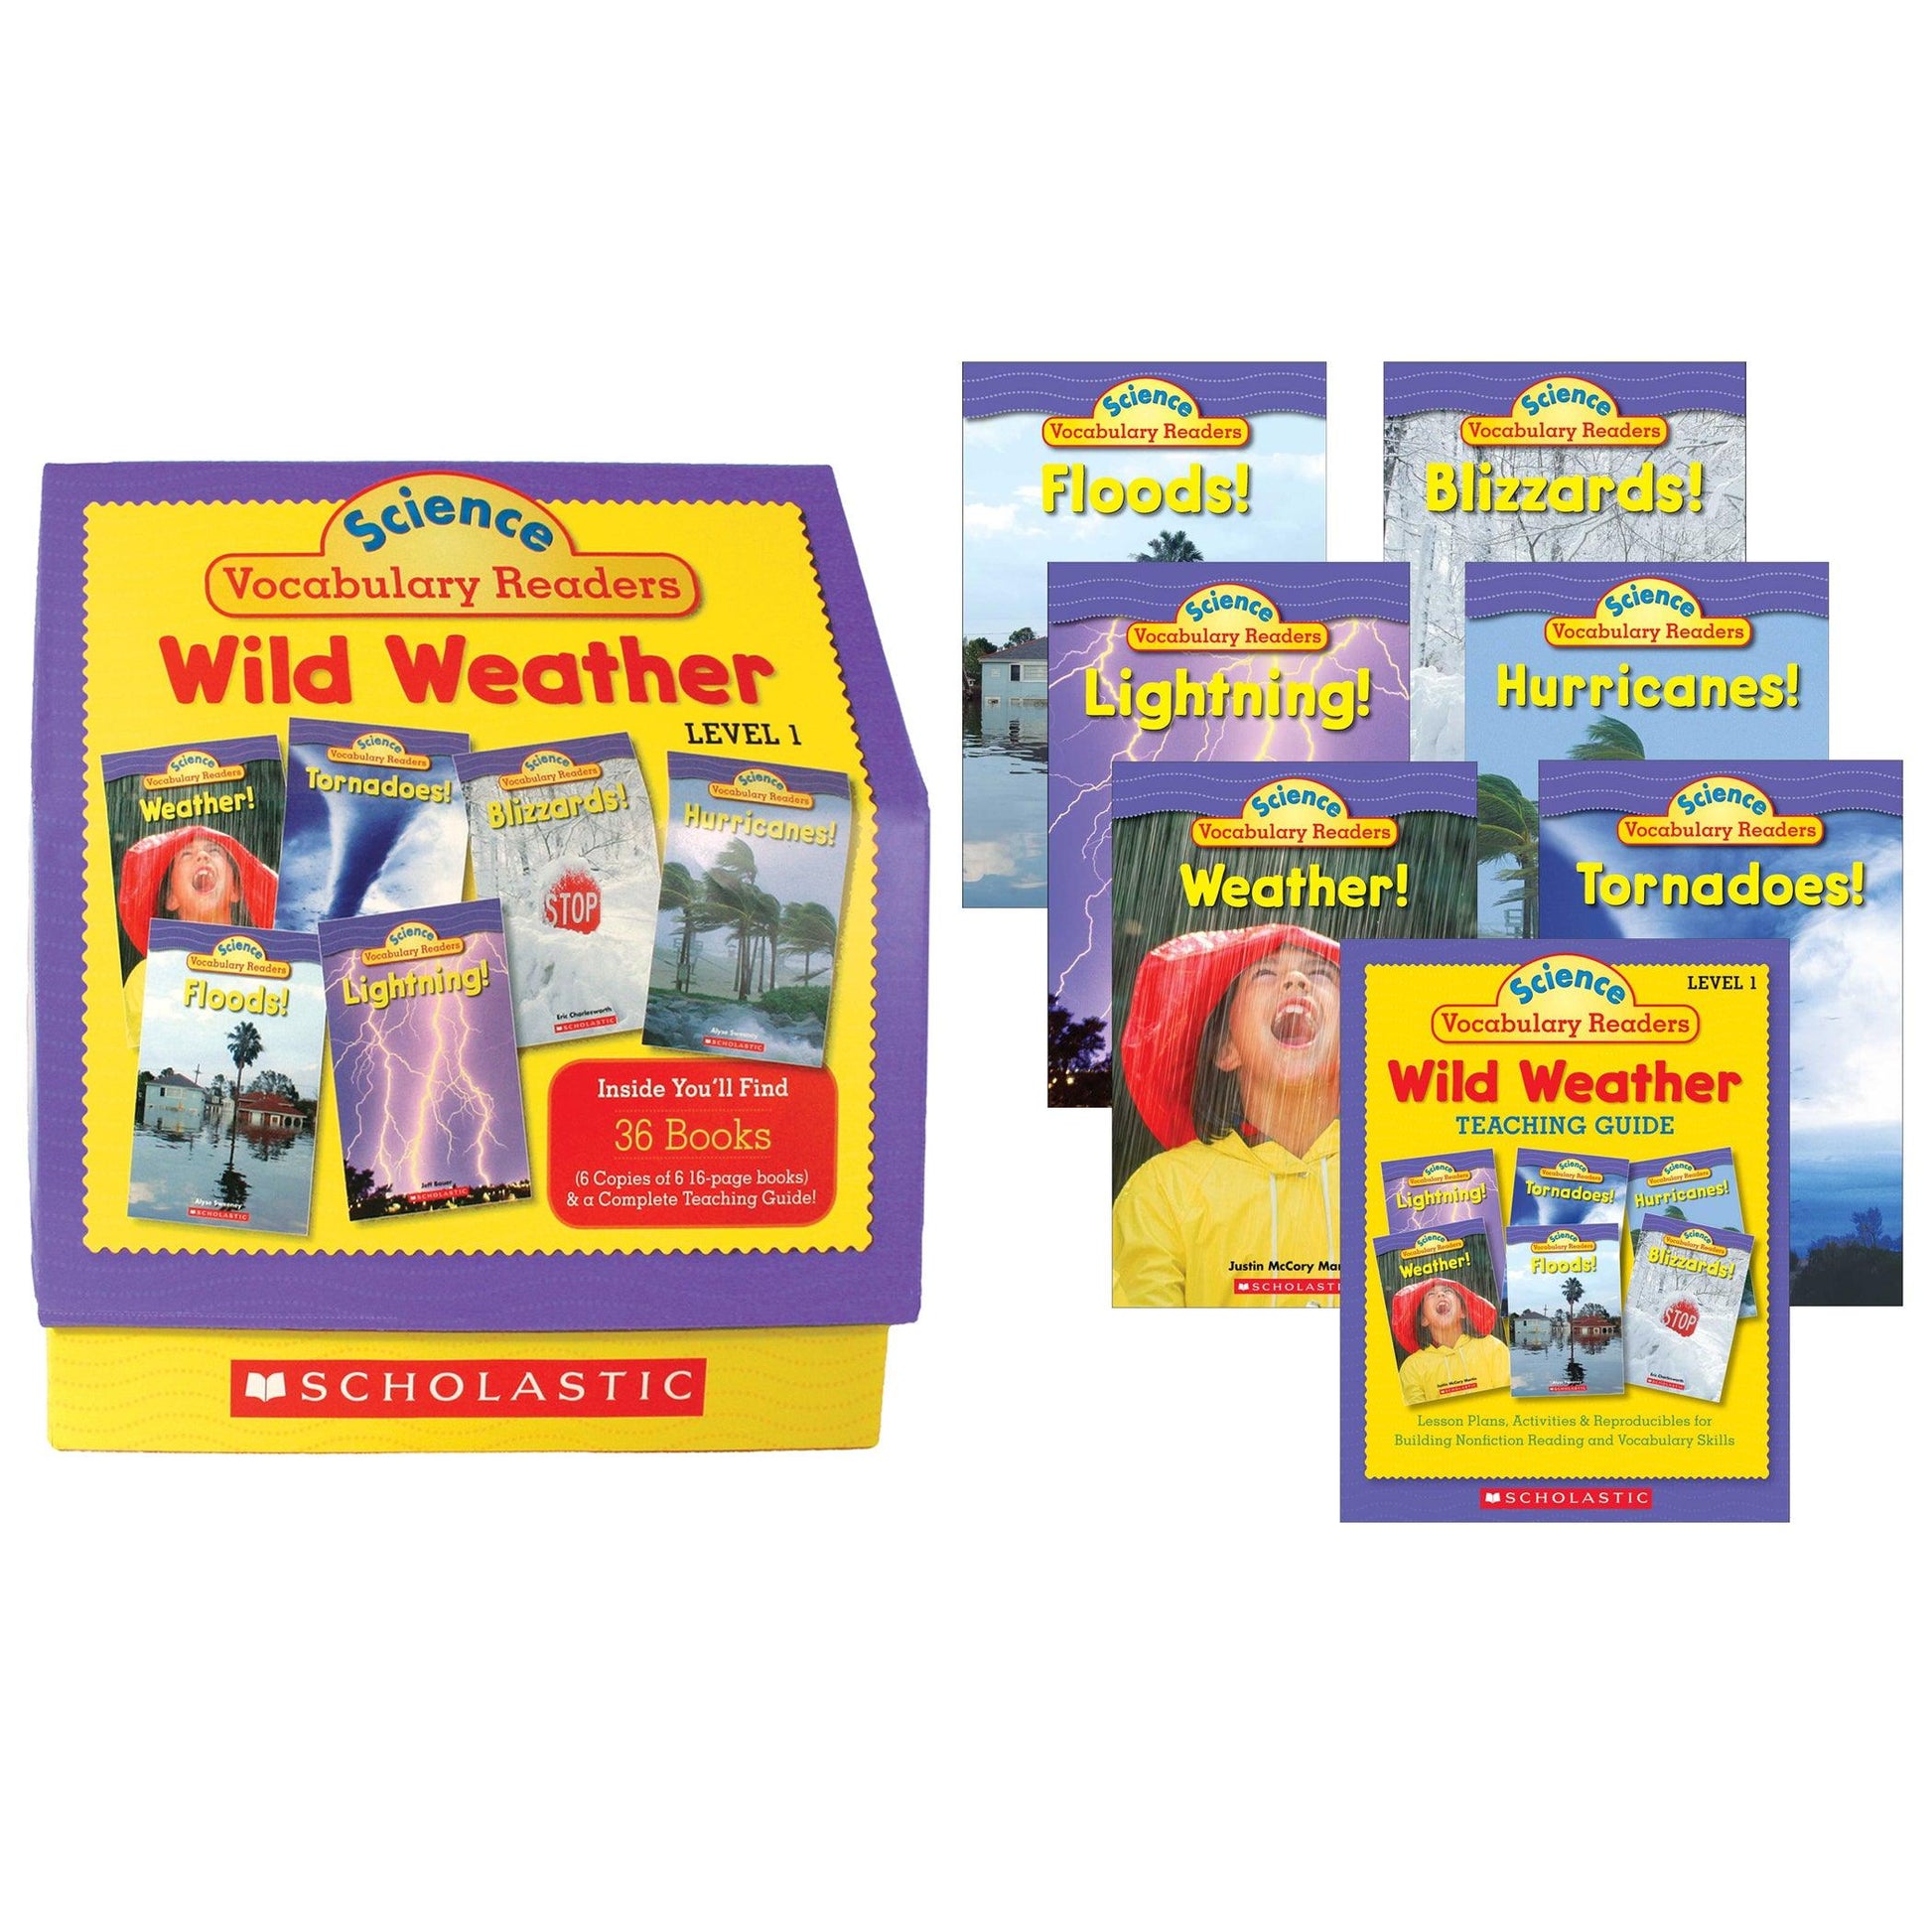 Science Vocabulary Readers Wild Weather - Loomini